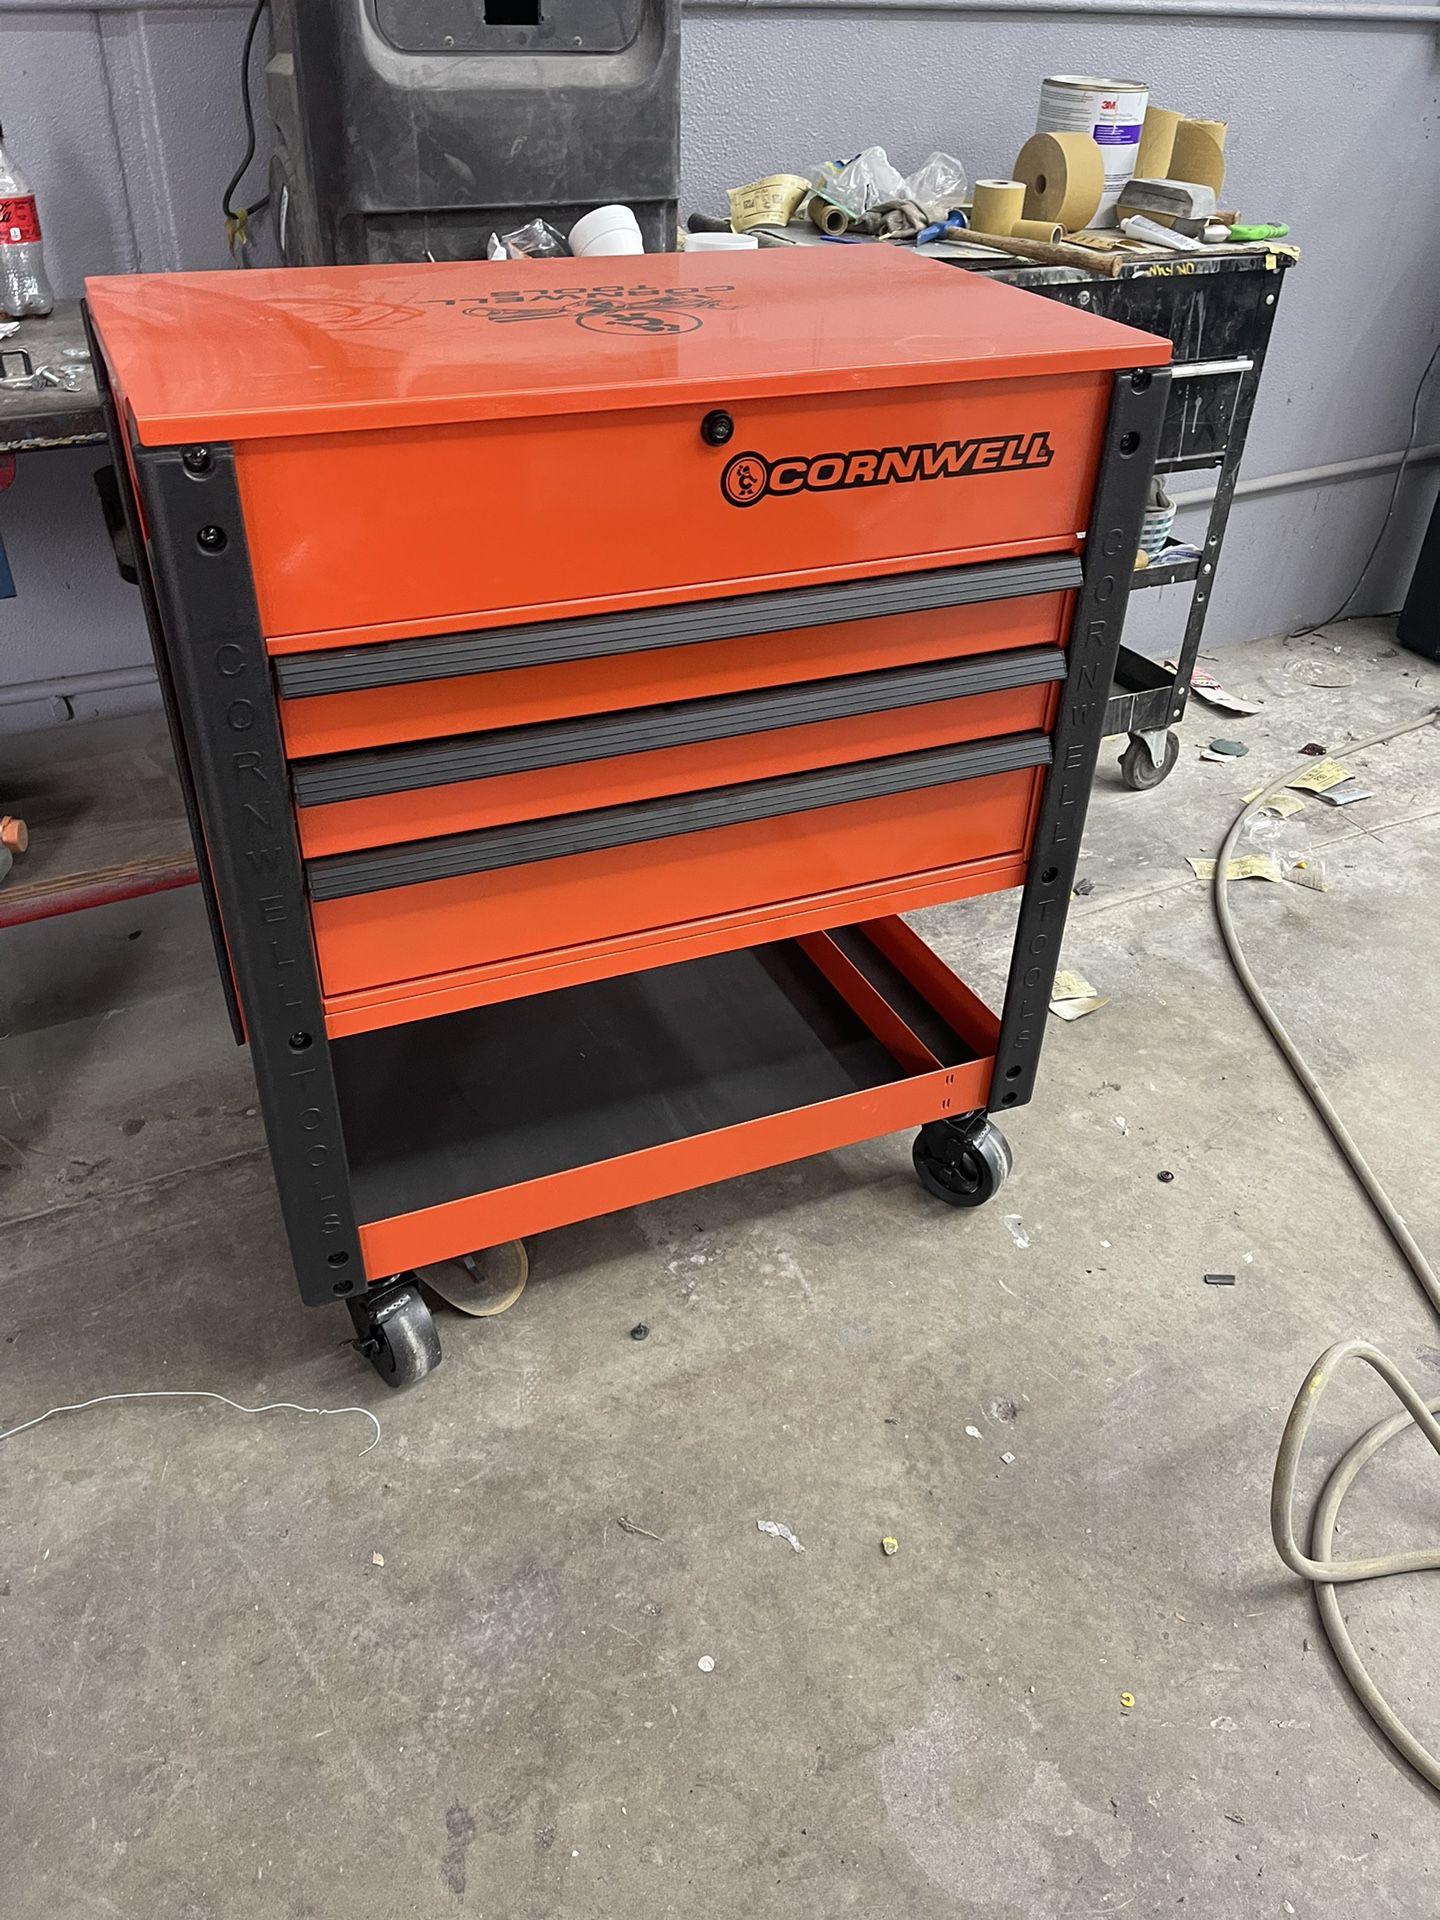 Cornwell Tool Cart for Sale in Bell Gardens, CA - OfferUp